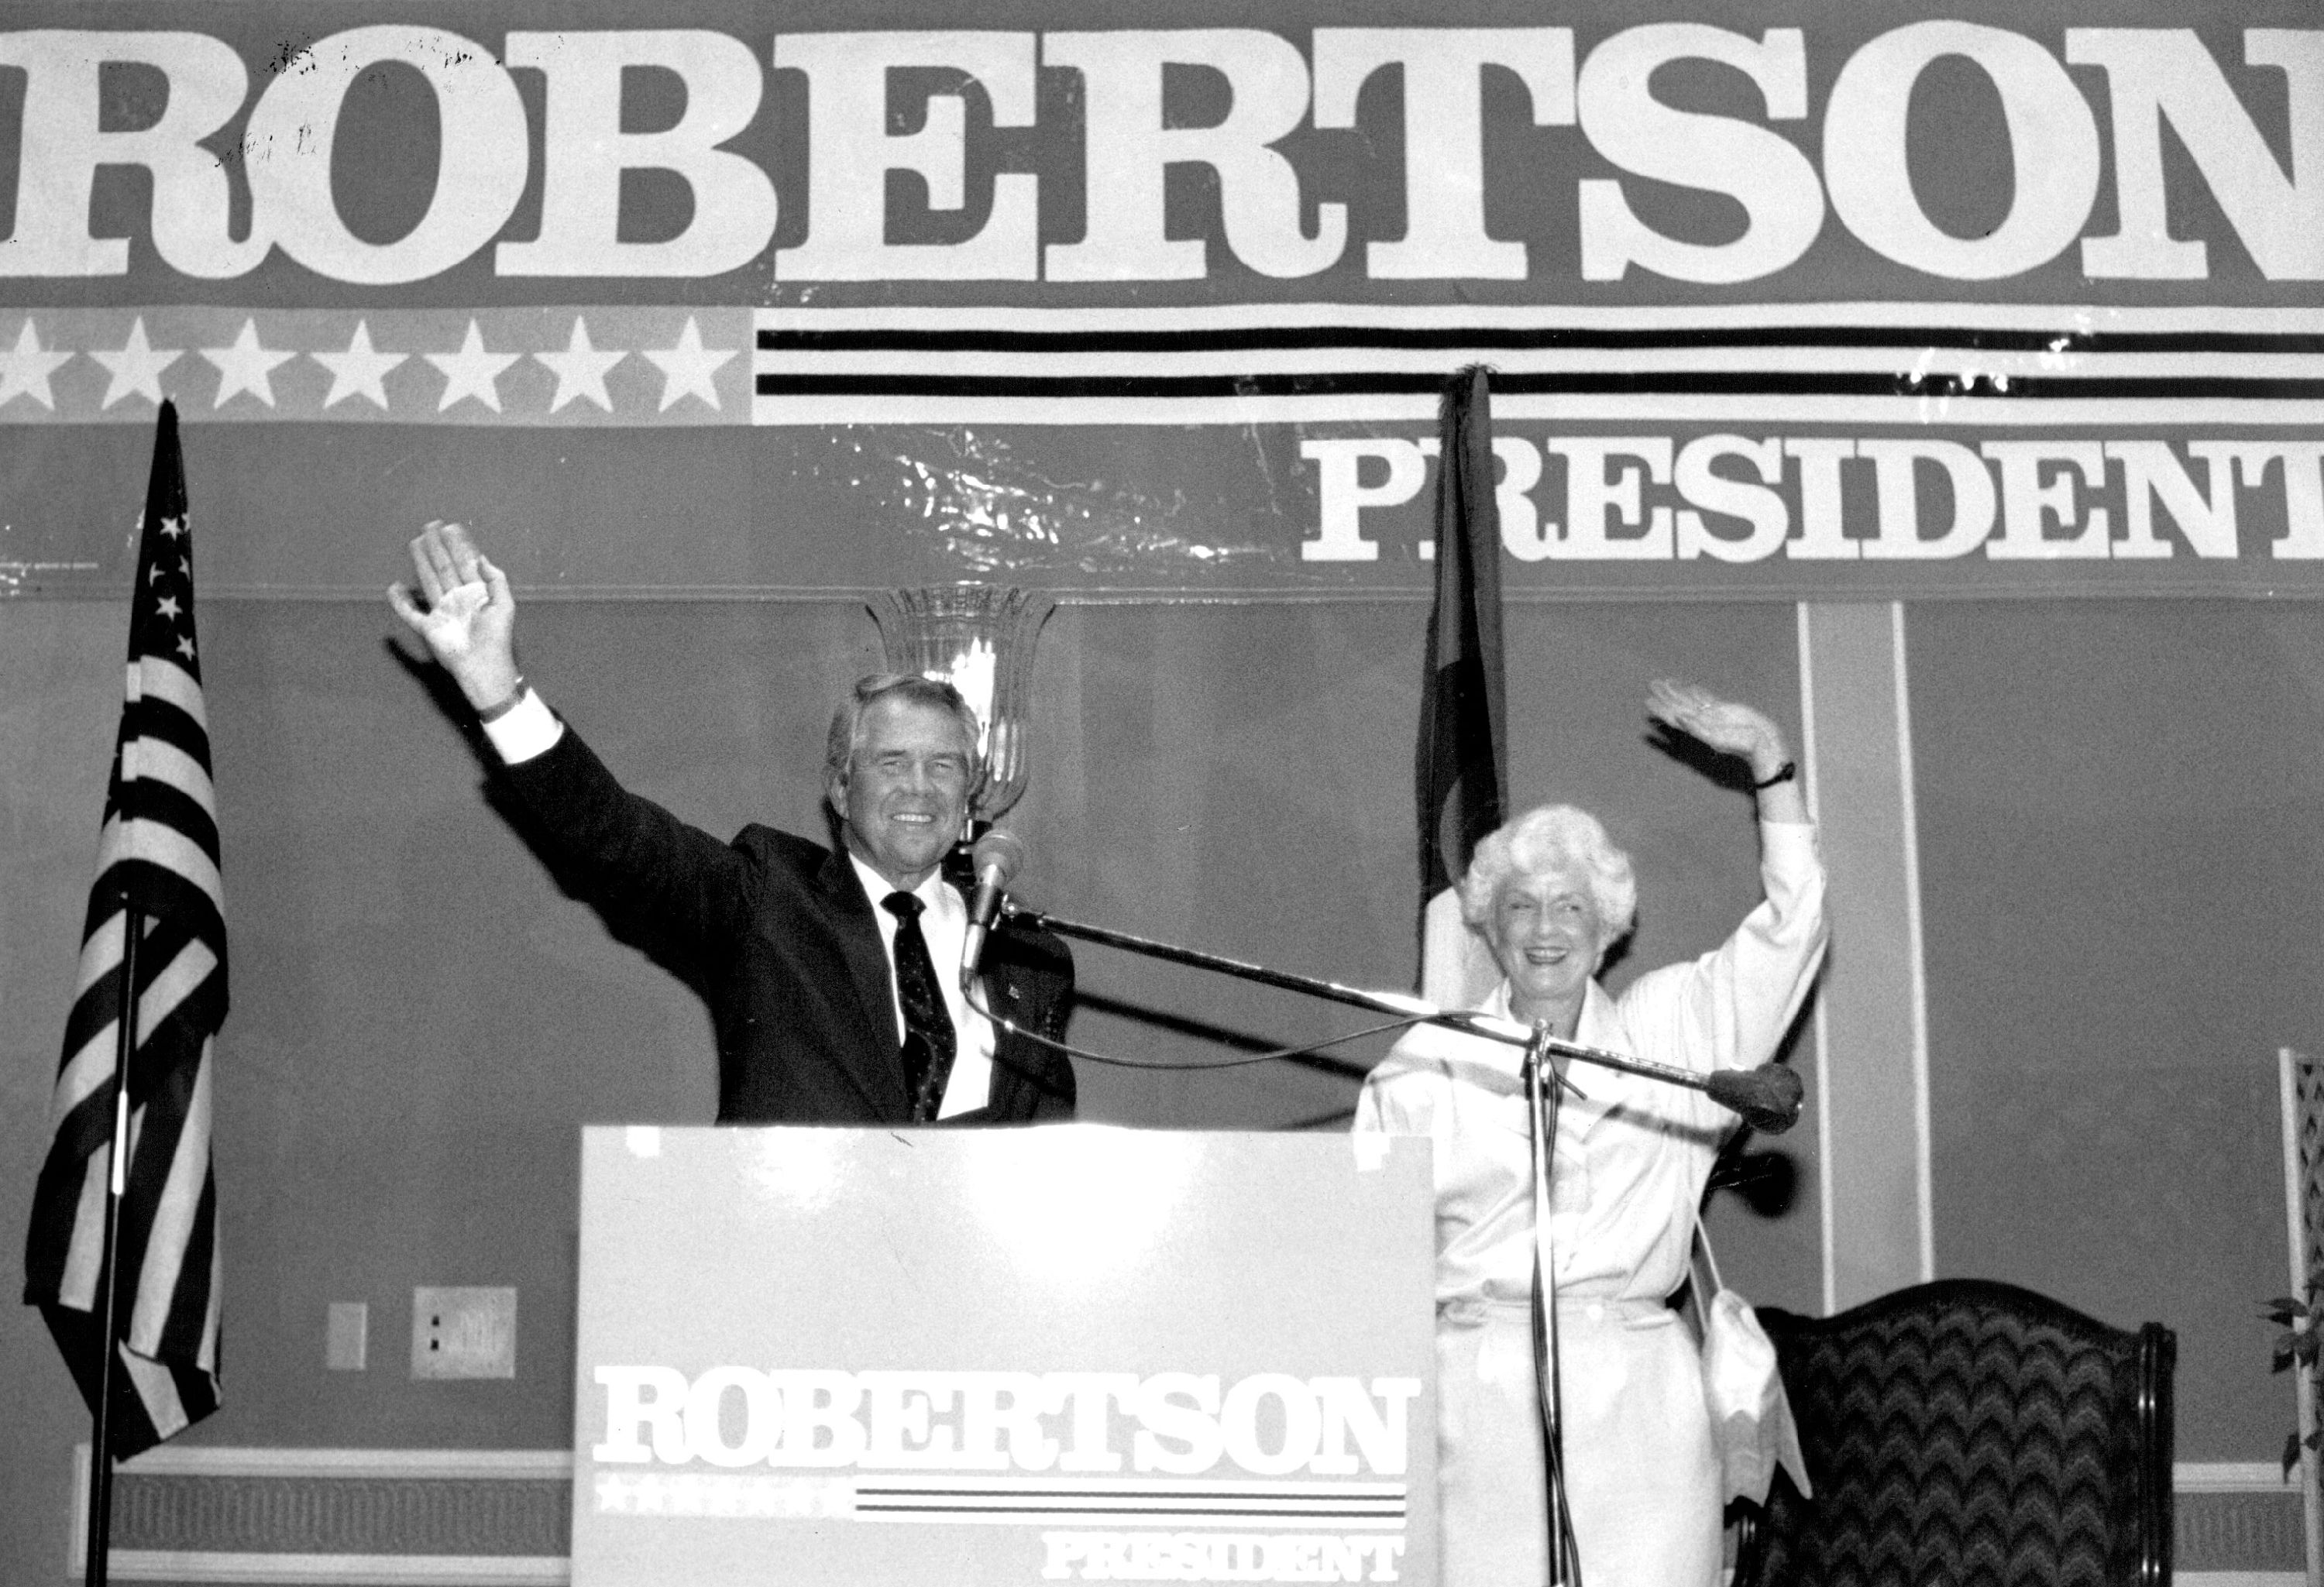 Pat and Adelia Robertson greeting supporters at a rally in Denver on April 3, 1988. | Source: Getty Images